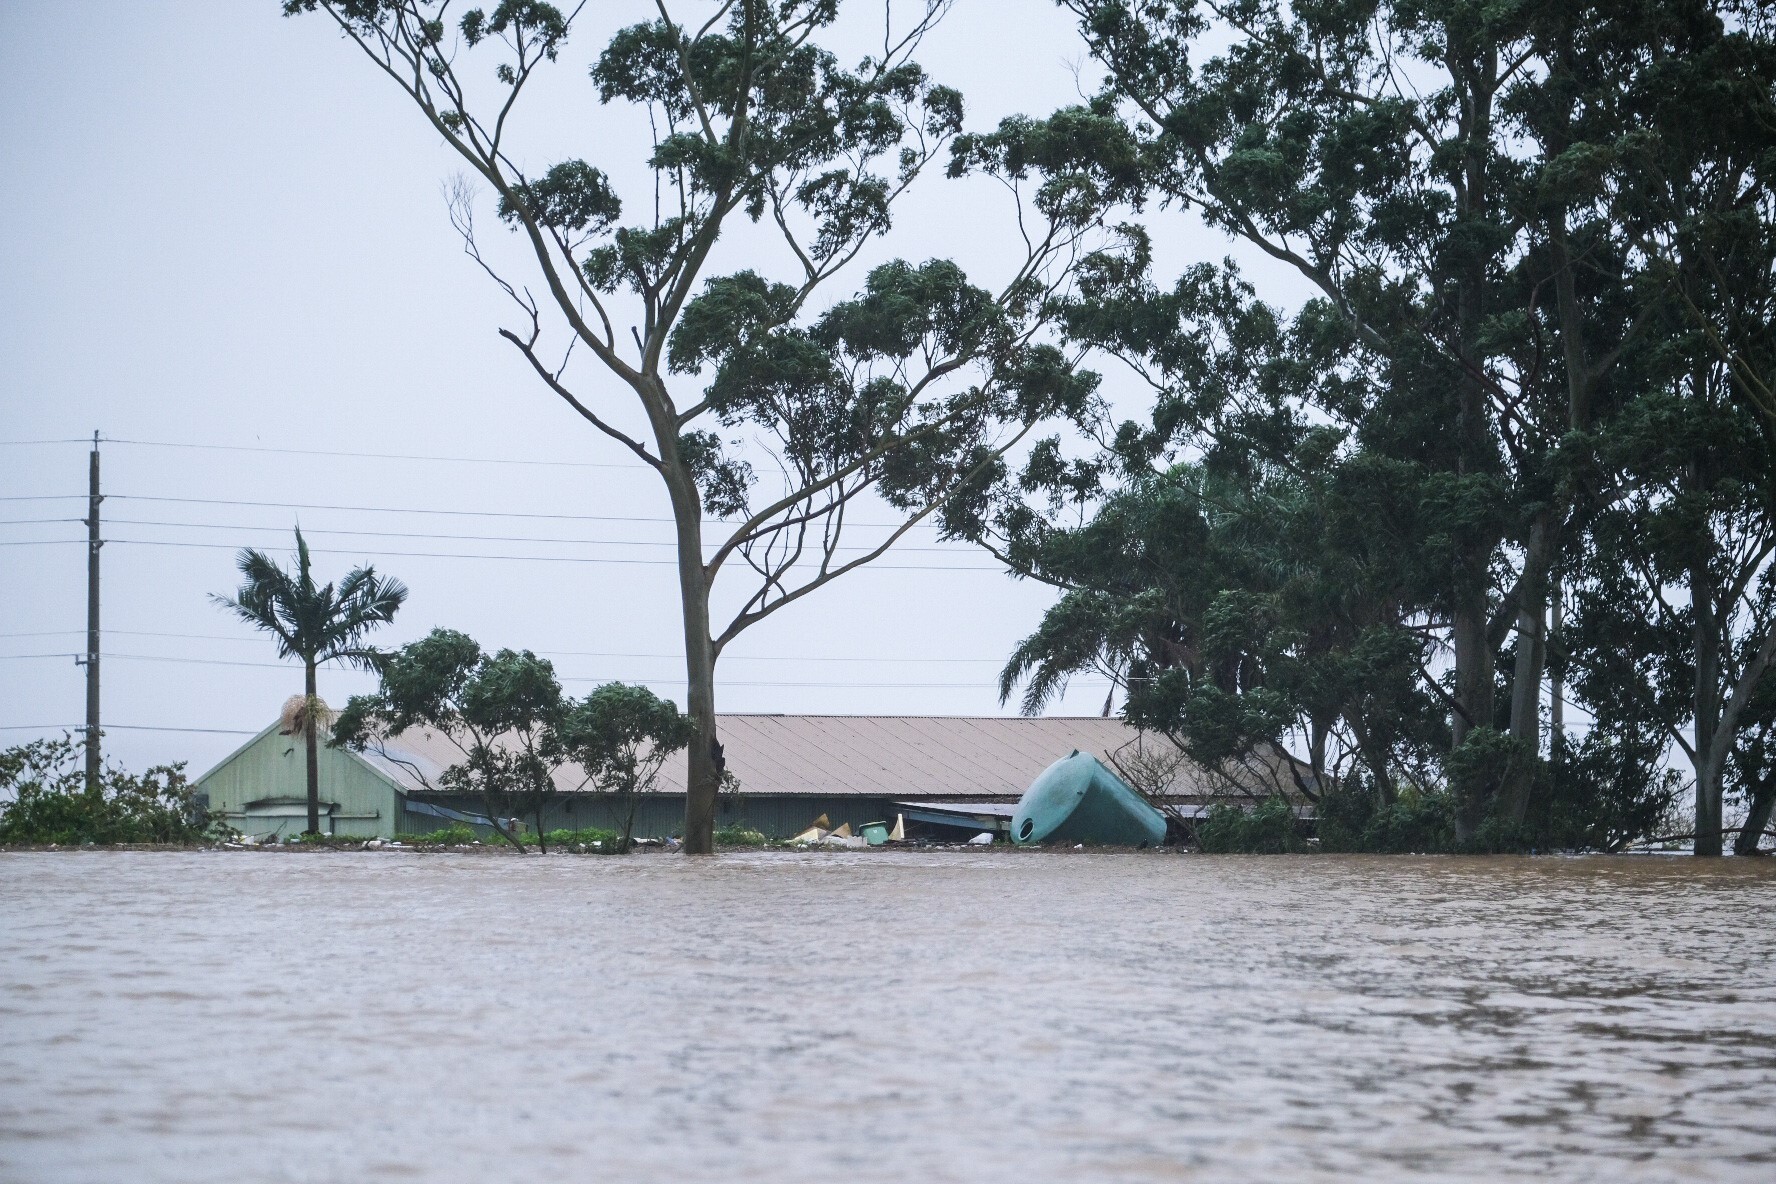 a green-coloured property is completely inundated by floodwaters up to its roof. a green water tank floats nearby